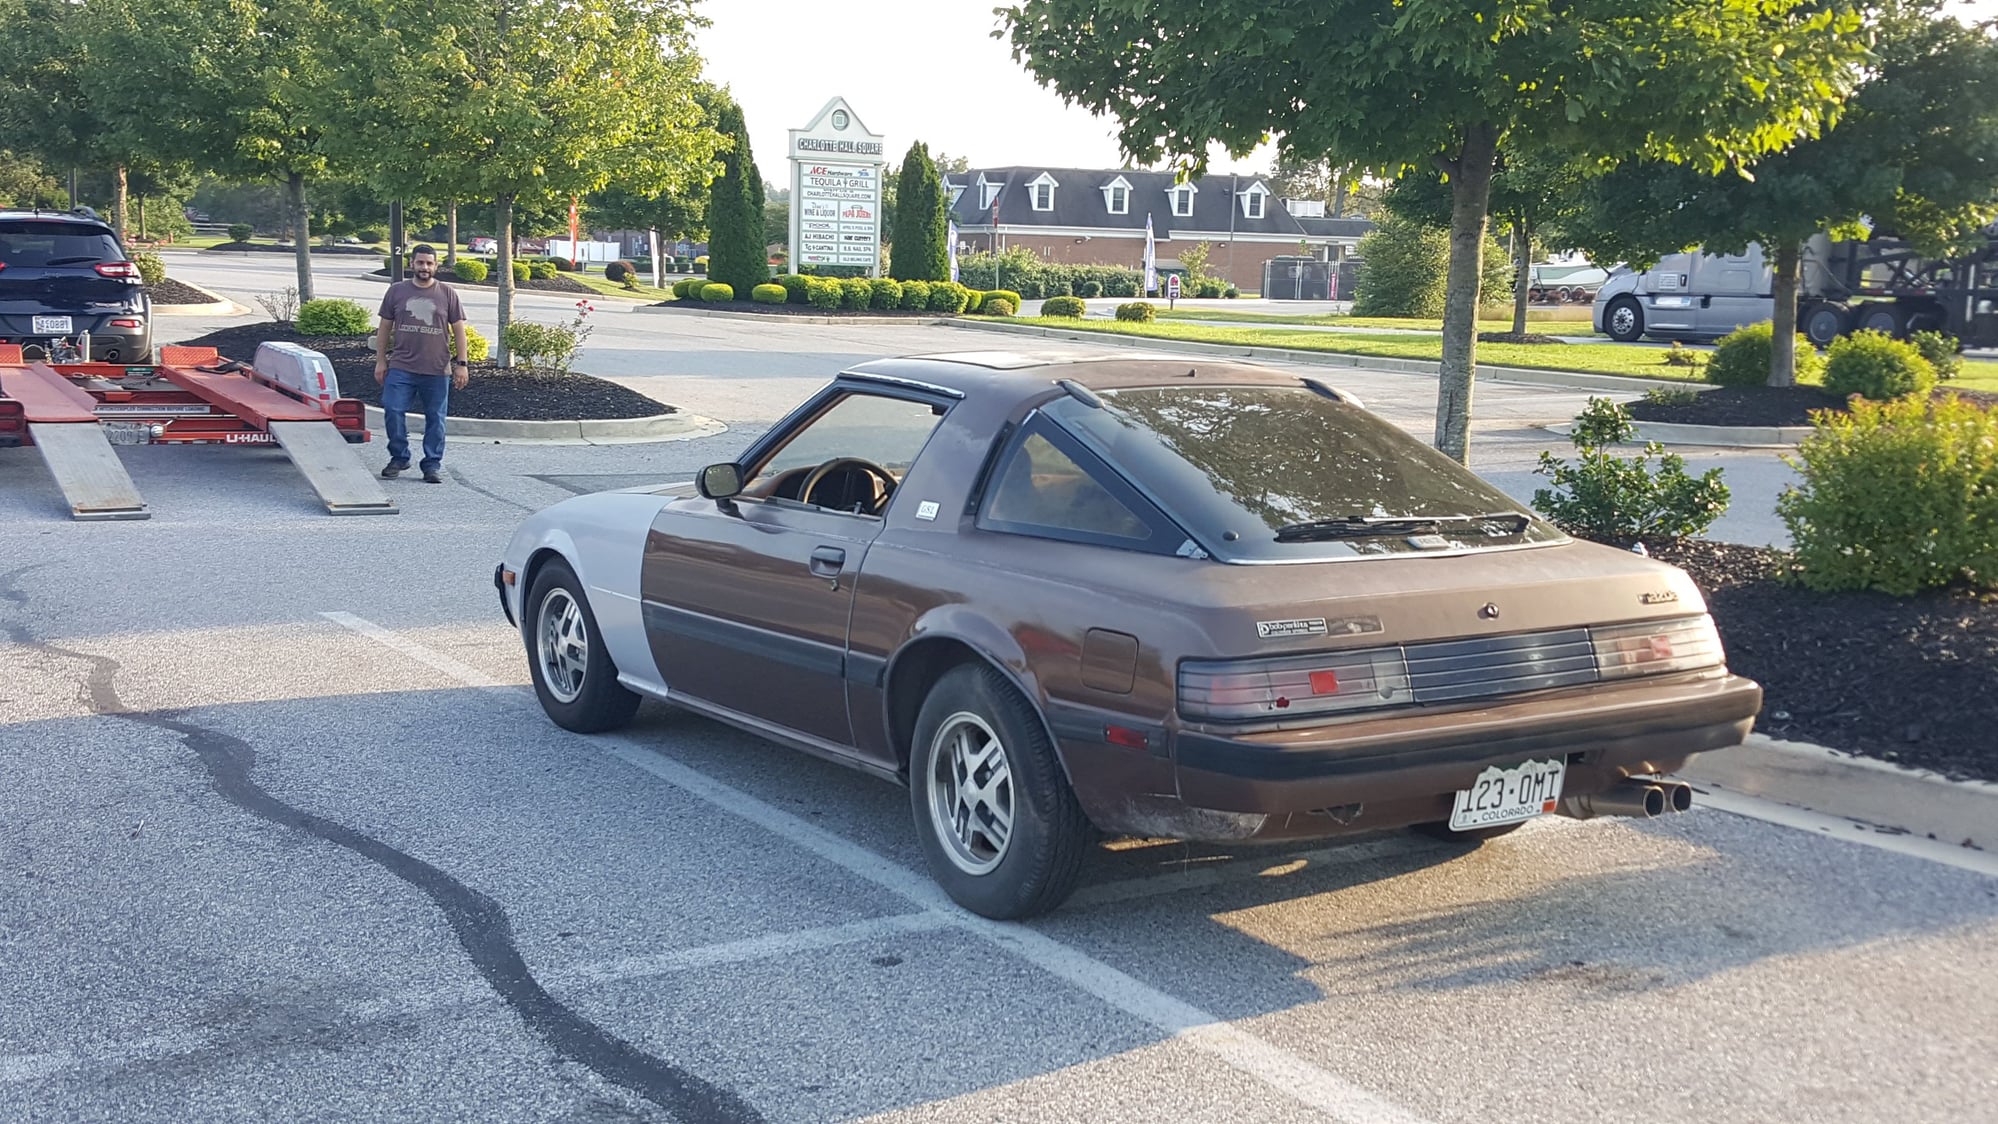 1983 Mazda RX-7 - Project car - Used - VIN Jm1fb3317d0738894 - Manual - Brown - Great Mills, MD 20634, United States